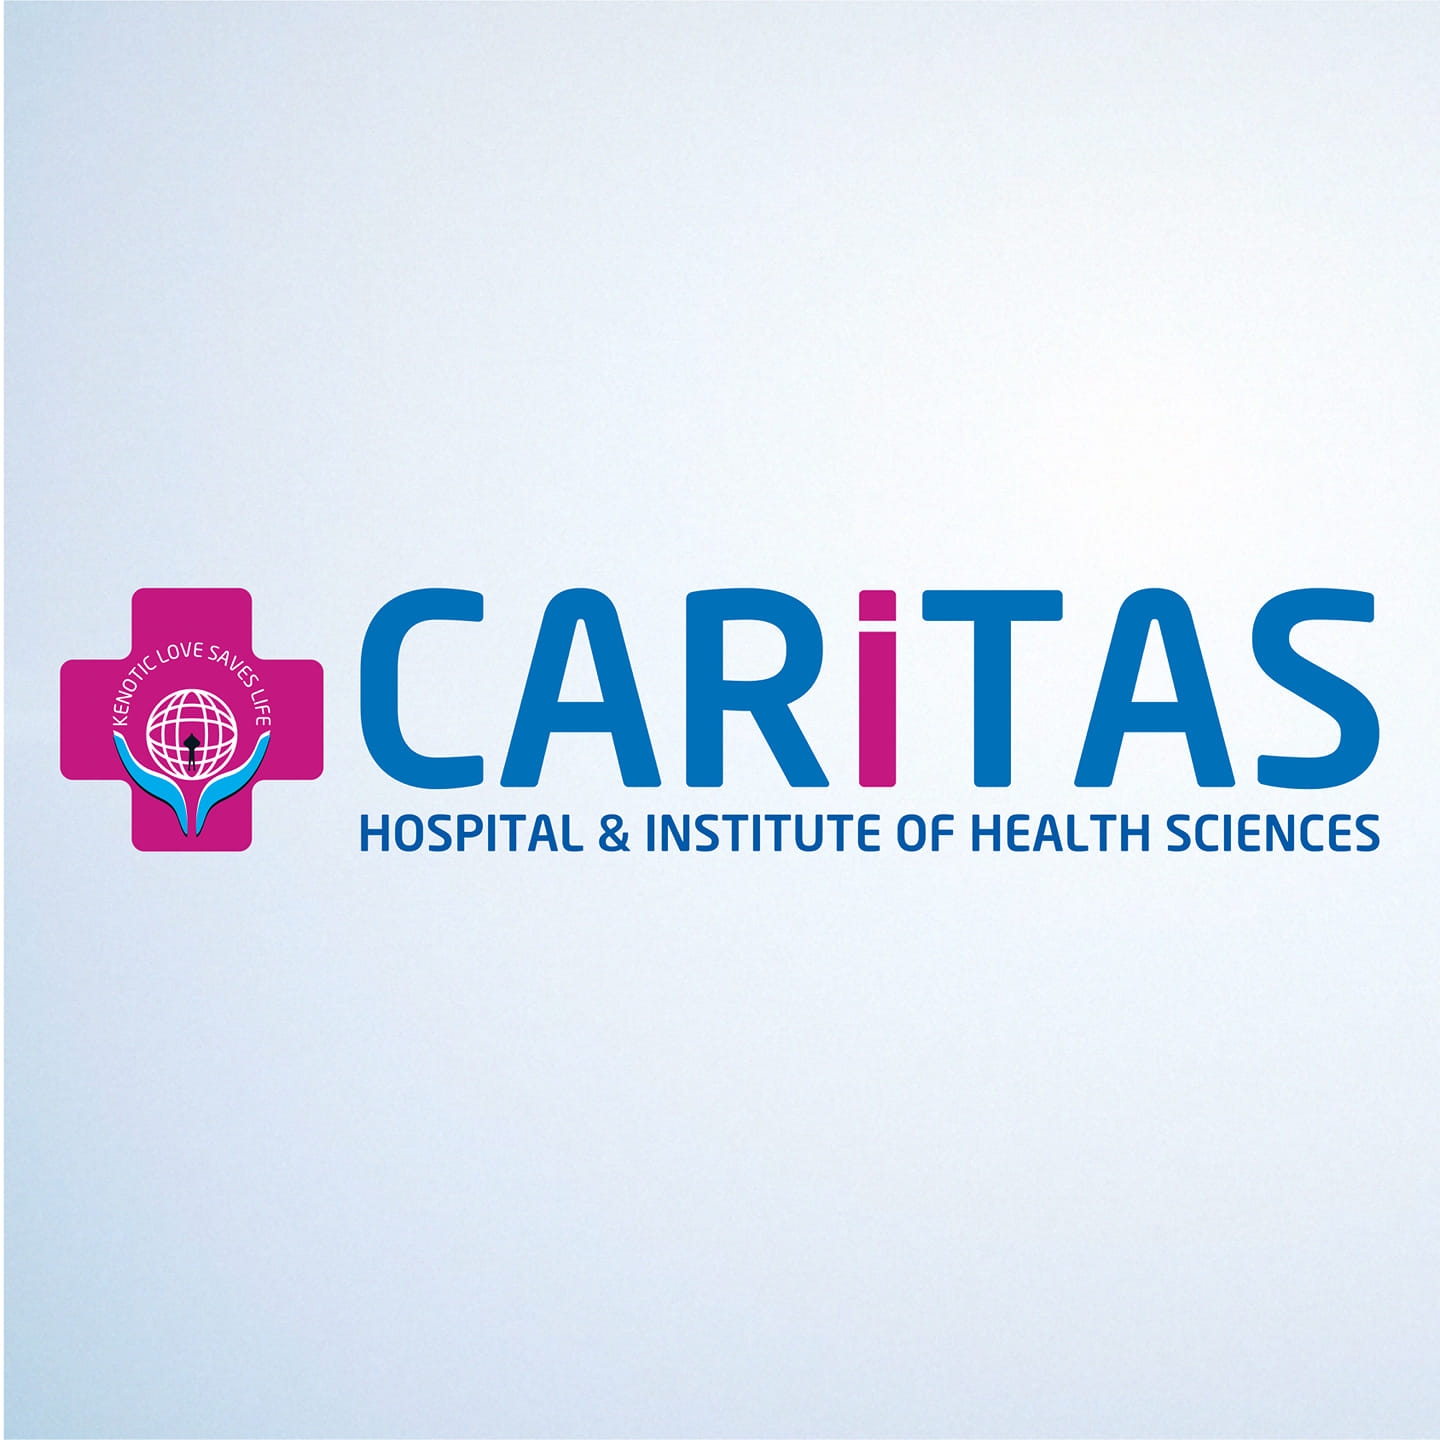 Caritas Multispeciality Hospital|Veterinary|Medical Services